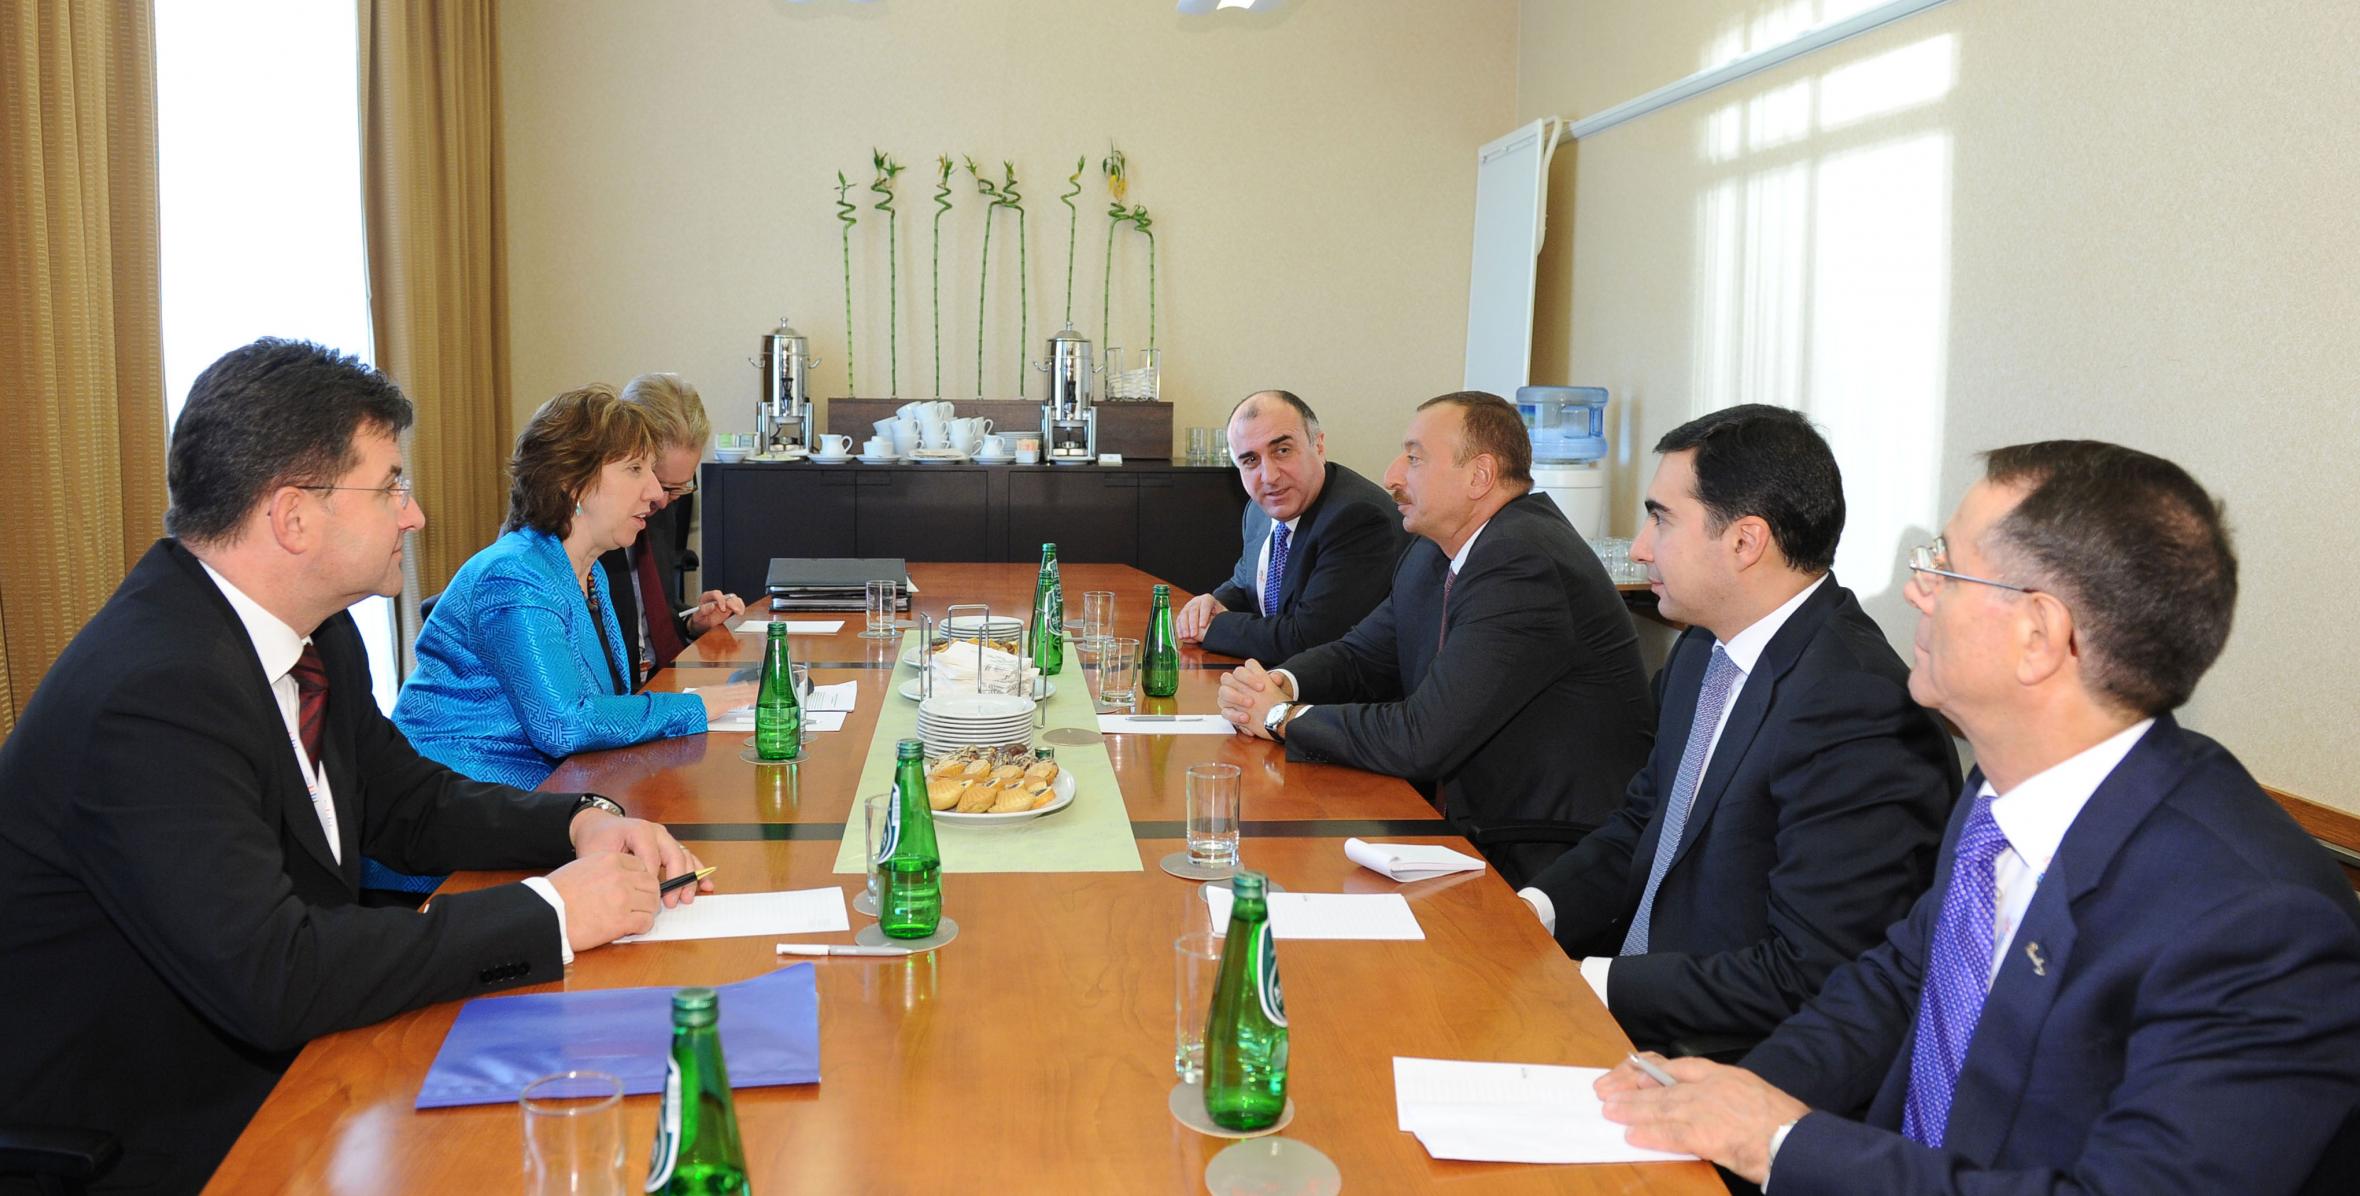 Ilham Aliyev met with the high representative of the European Union for foreign affairs and security policy, Catherine Ashton